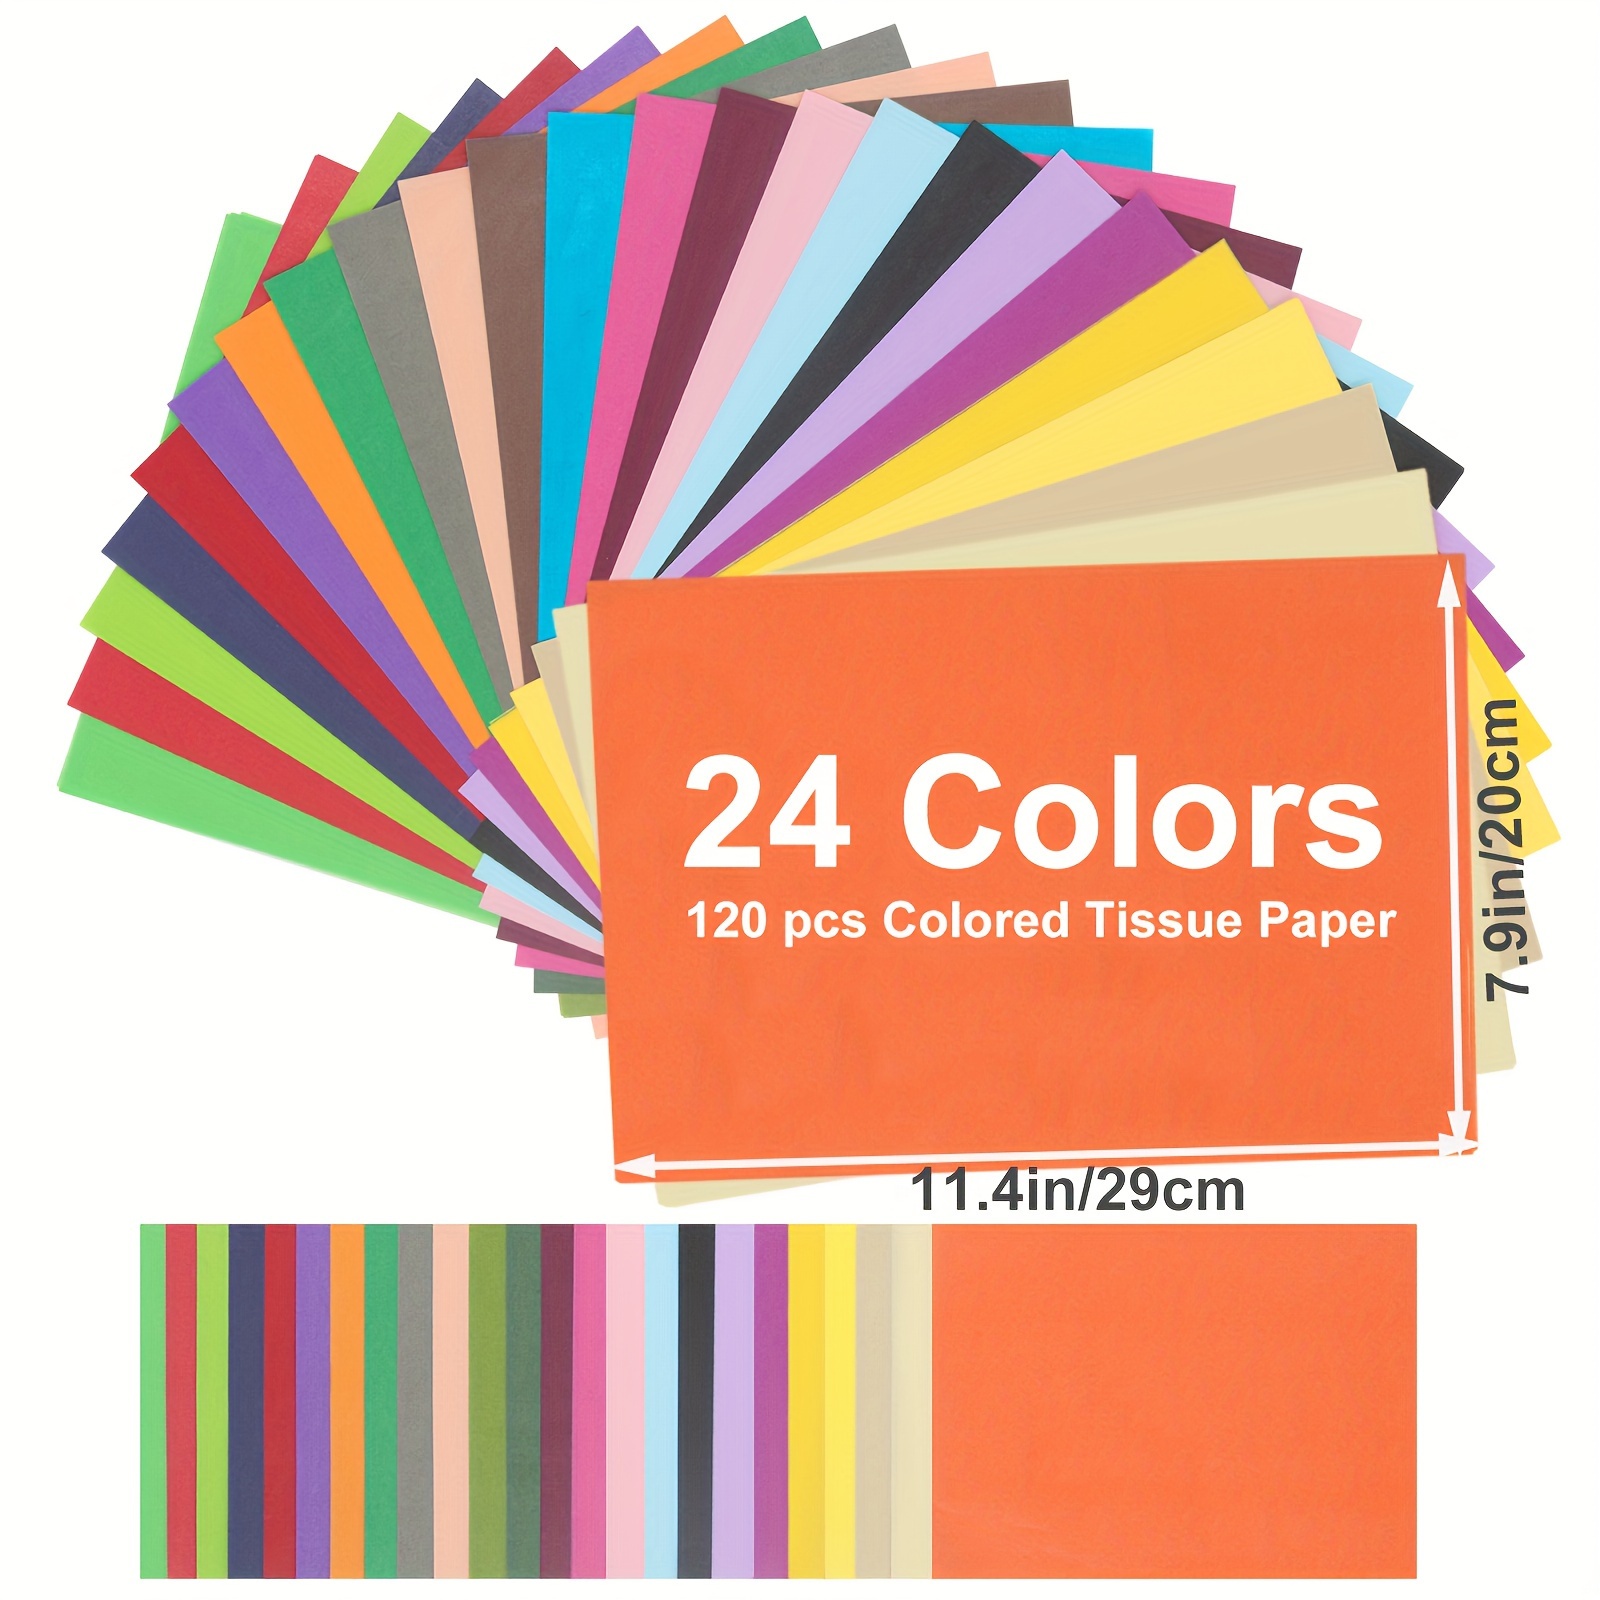 

120pcs Colored Paper, 24 Colors Tissue Paper Bulk, Gift Bags Tissue Paper For Decorative, Art, Rainbow Tissue Paper, 11.4in X 7.9in For Craft Birthday Party Festival